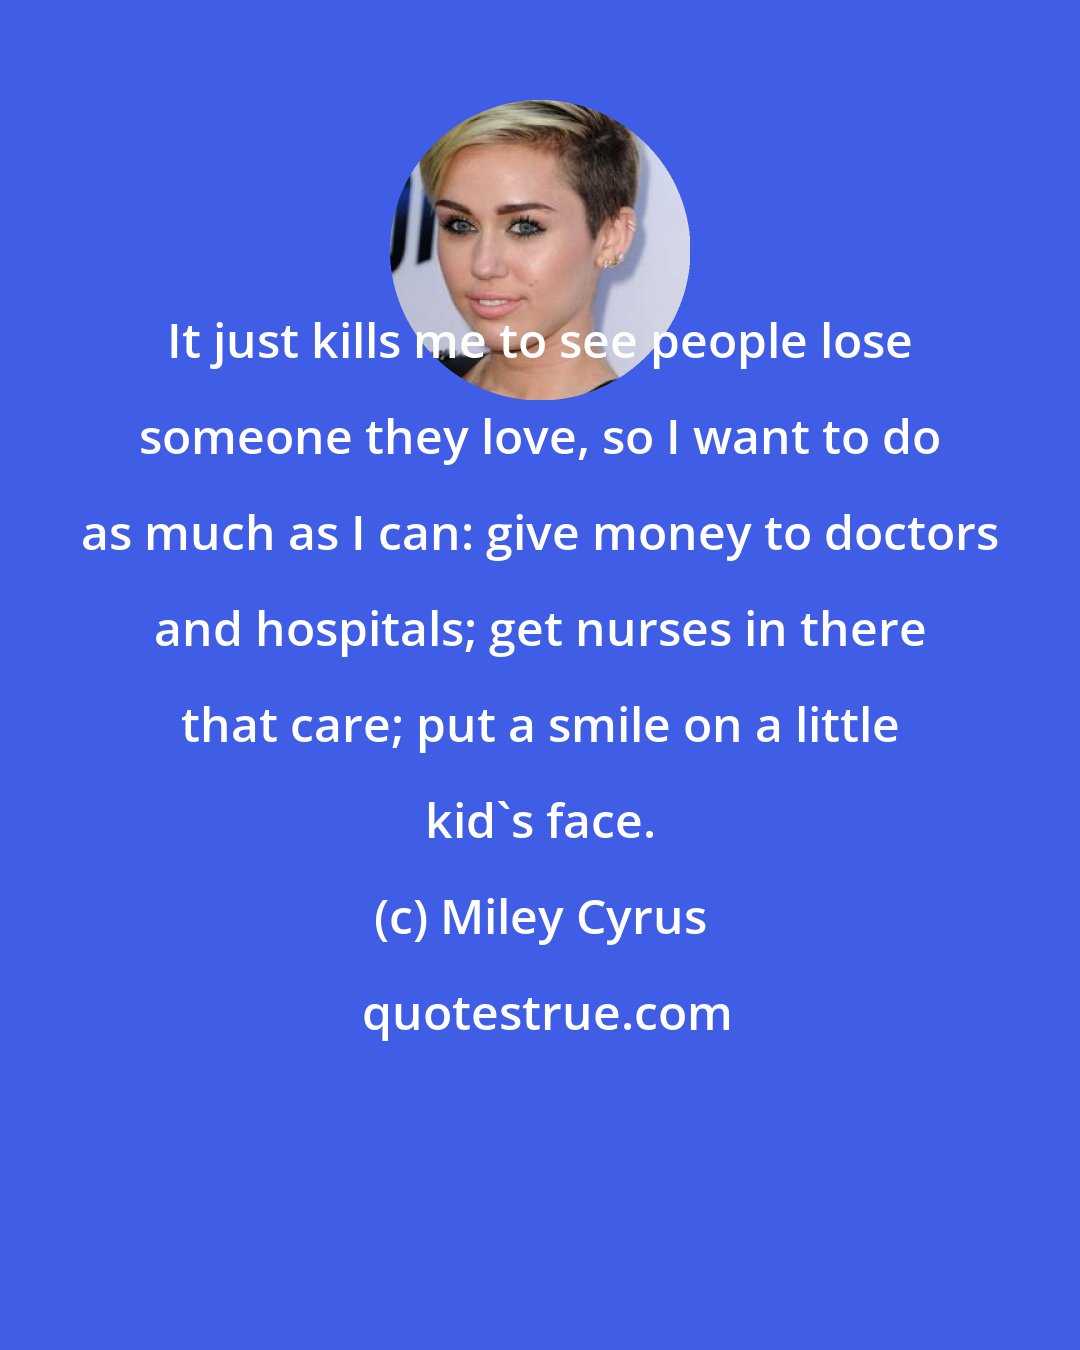 Miley Cyrus: It just kills me to see people lose someone they love, so I want to do as much as I can: give money to doctors and hospitals; get nurses in there that care; put a smile on a little kid's face.